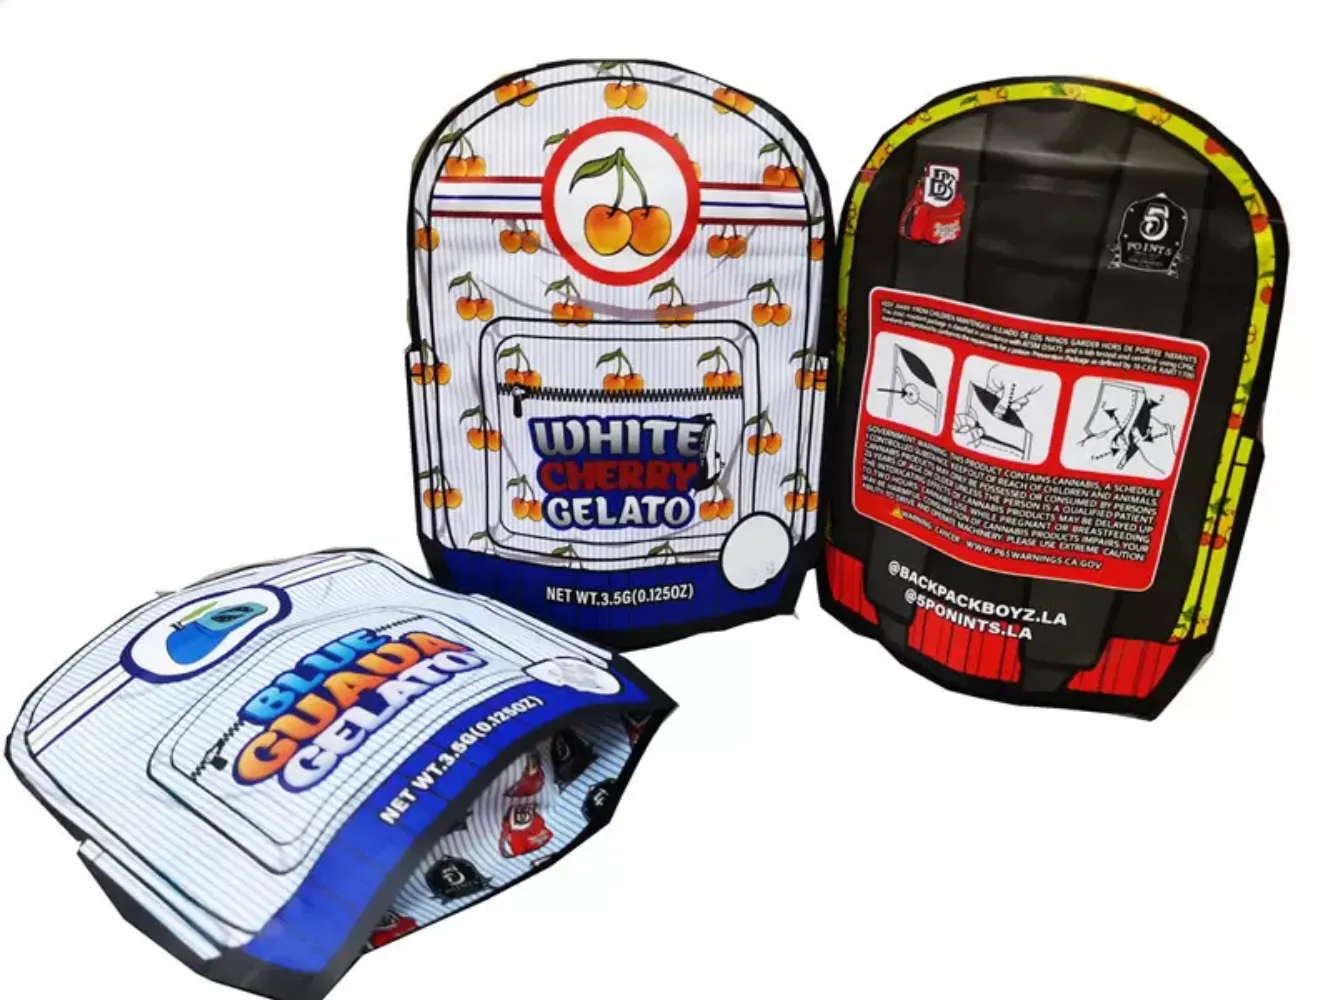 BACKPACK BOYZ Special Shape Bags 3.5g Resealable Stand Up Mylar Bags Child-proof Foil Pouch Bags